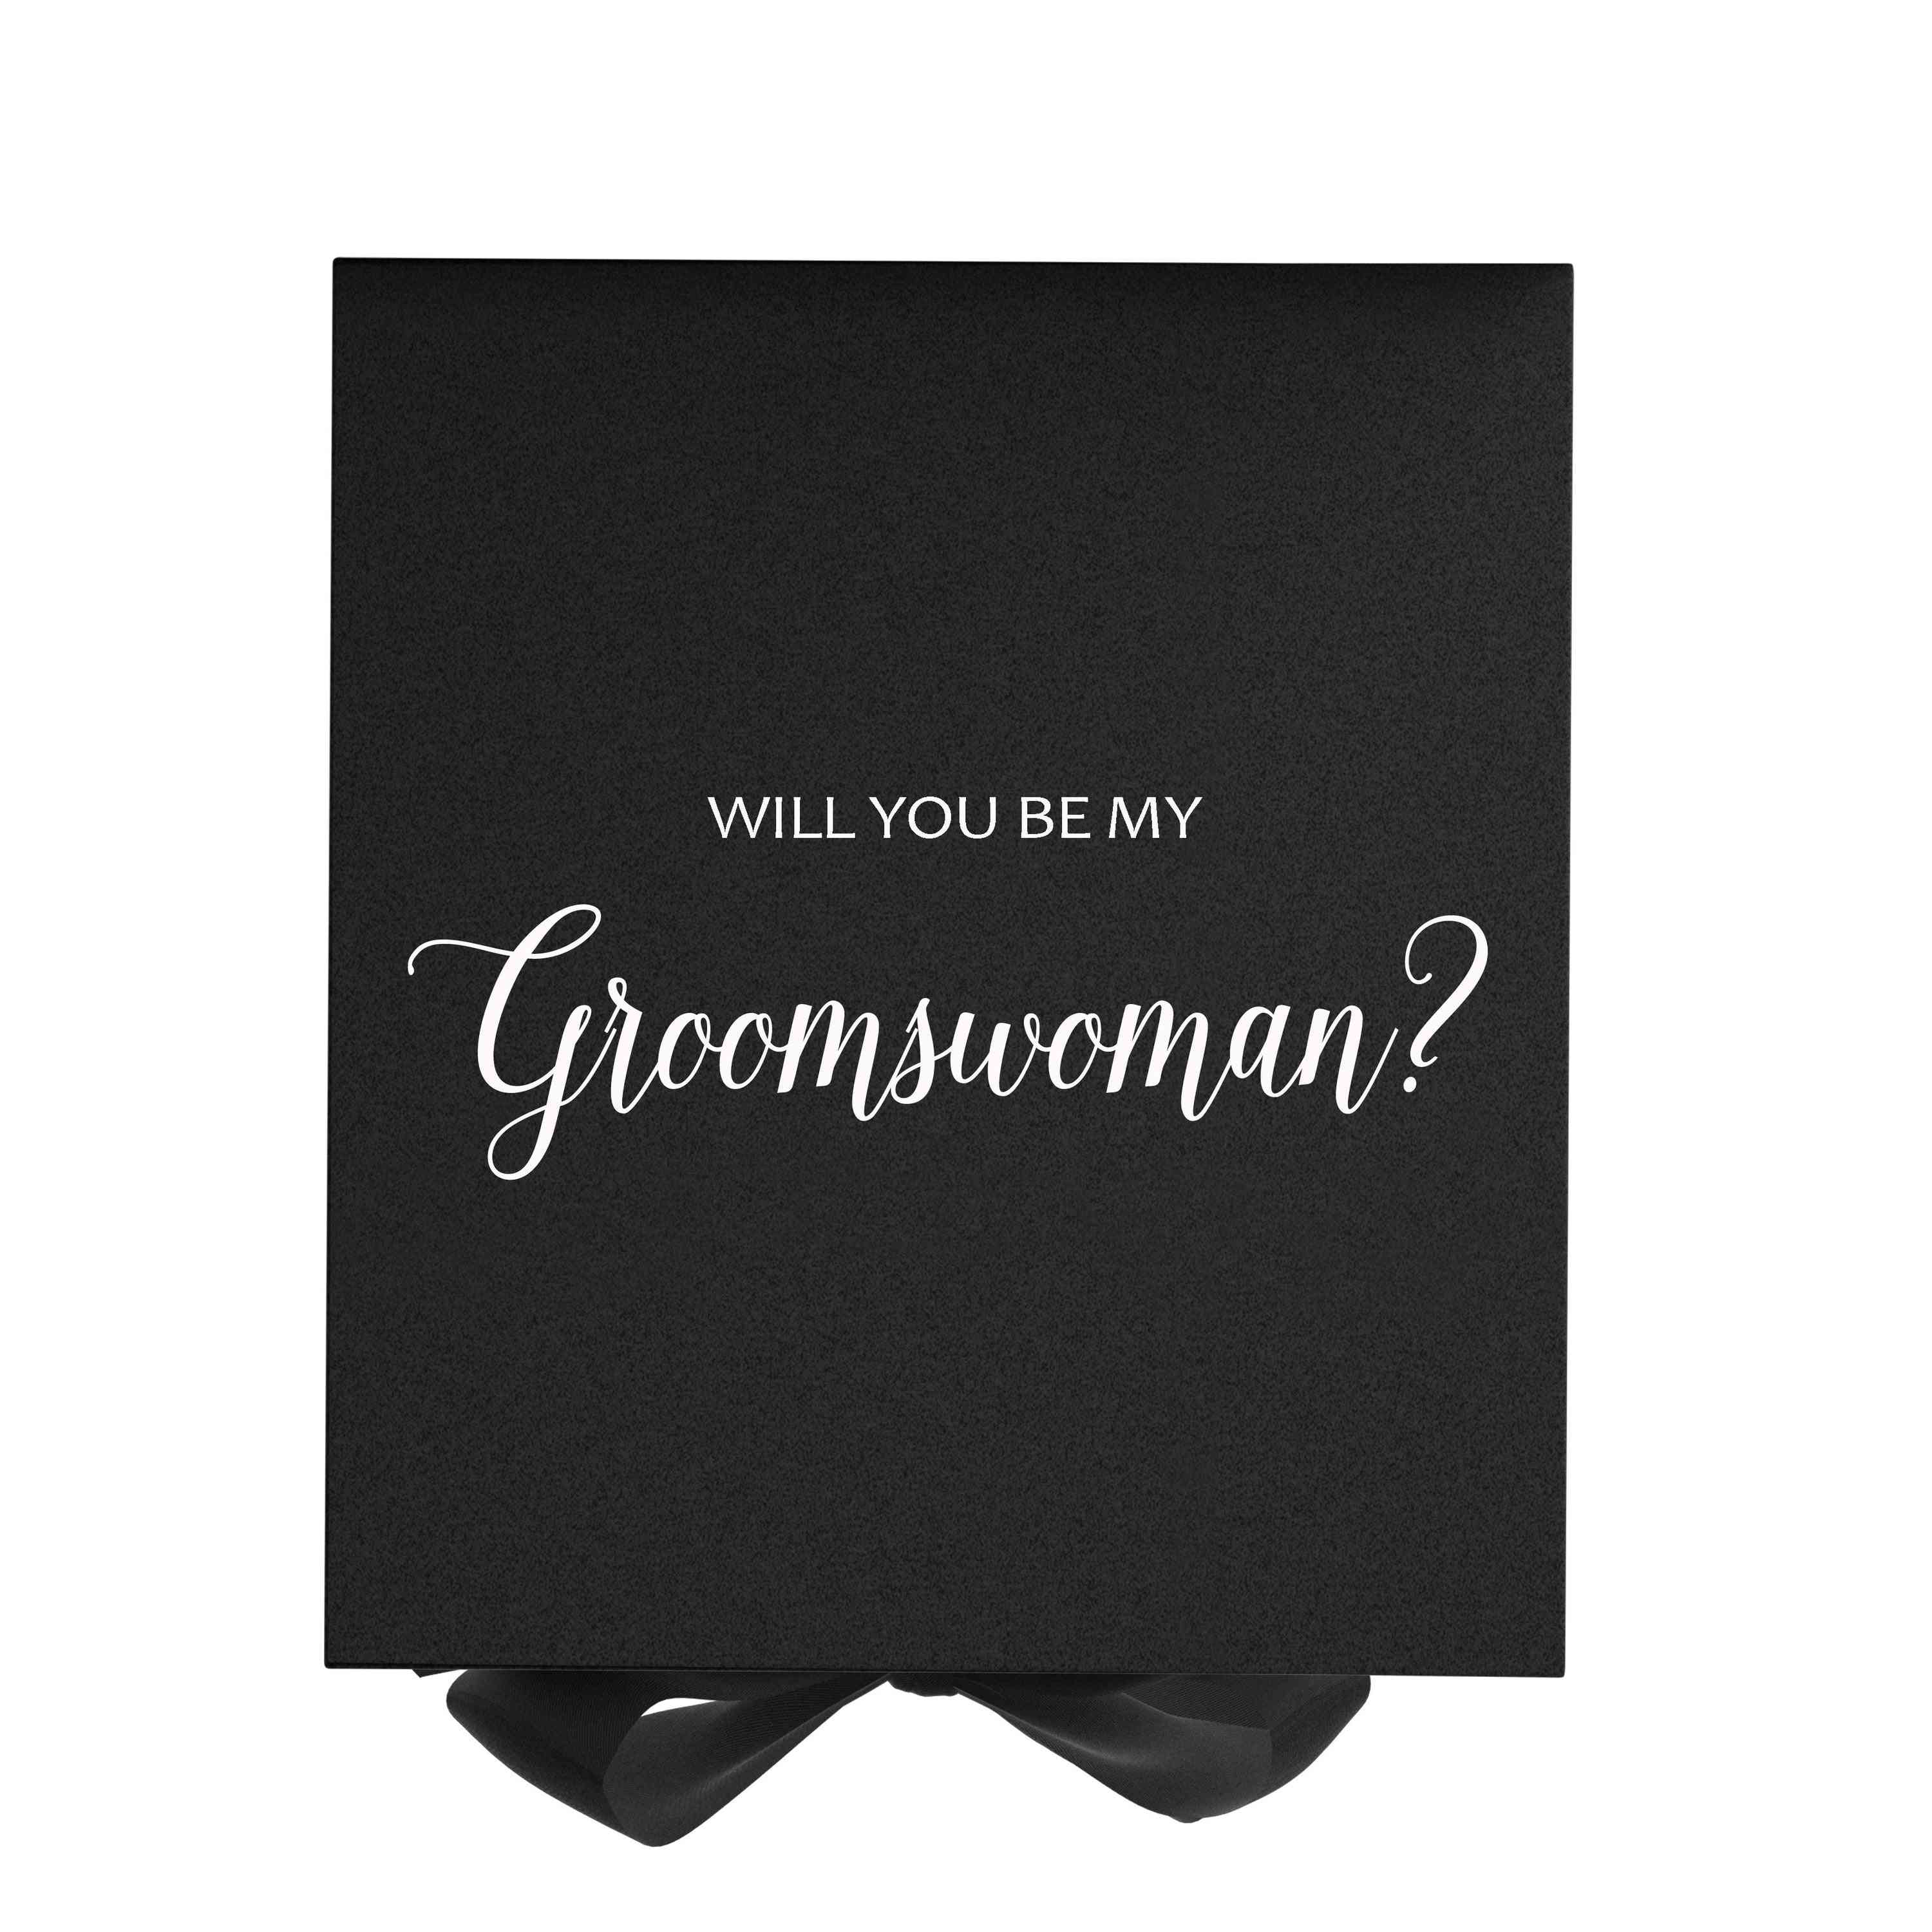 Will You Be My Groomswoman? Proposal Box Black - No Border